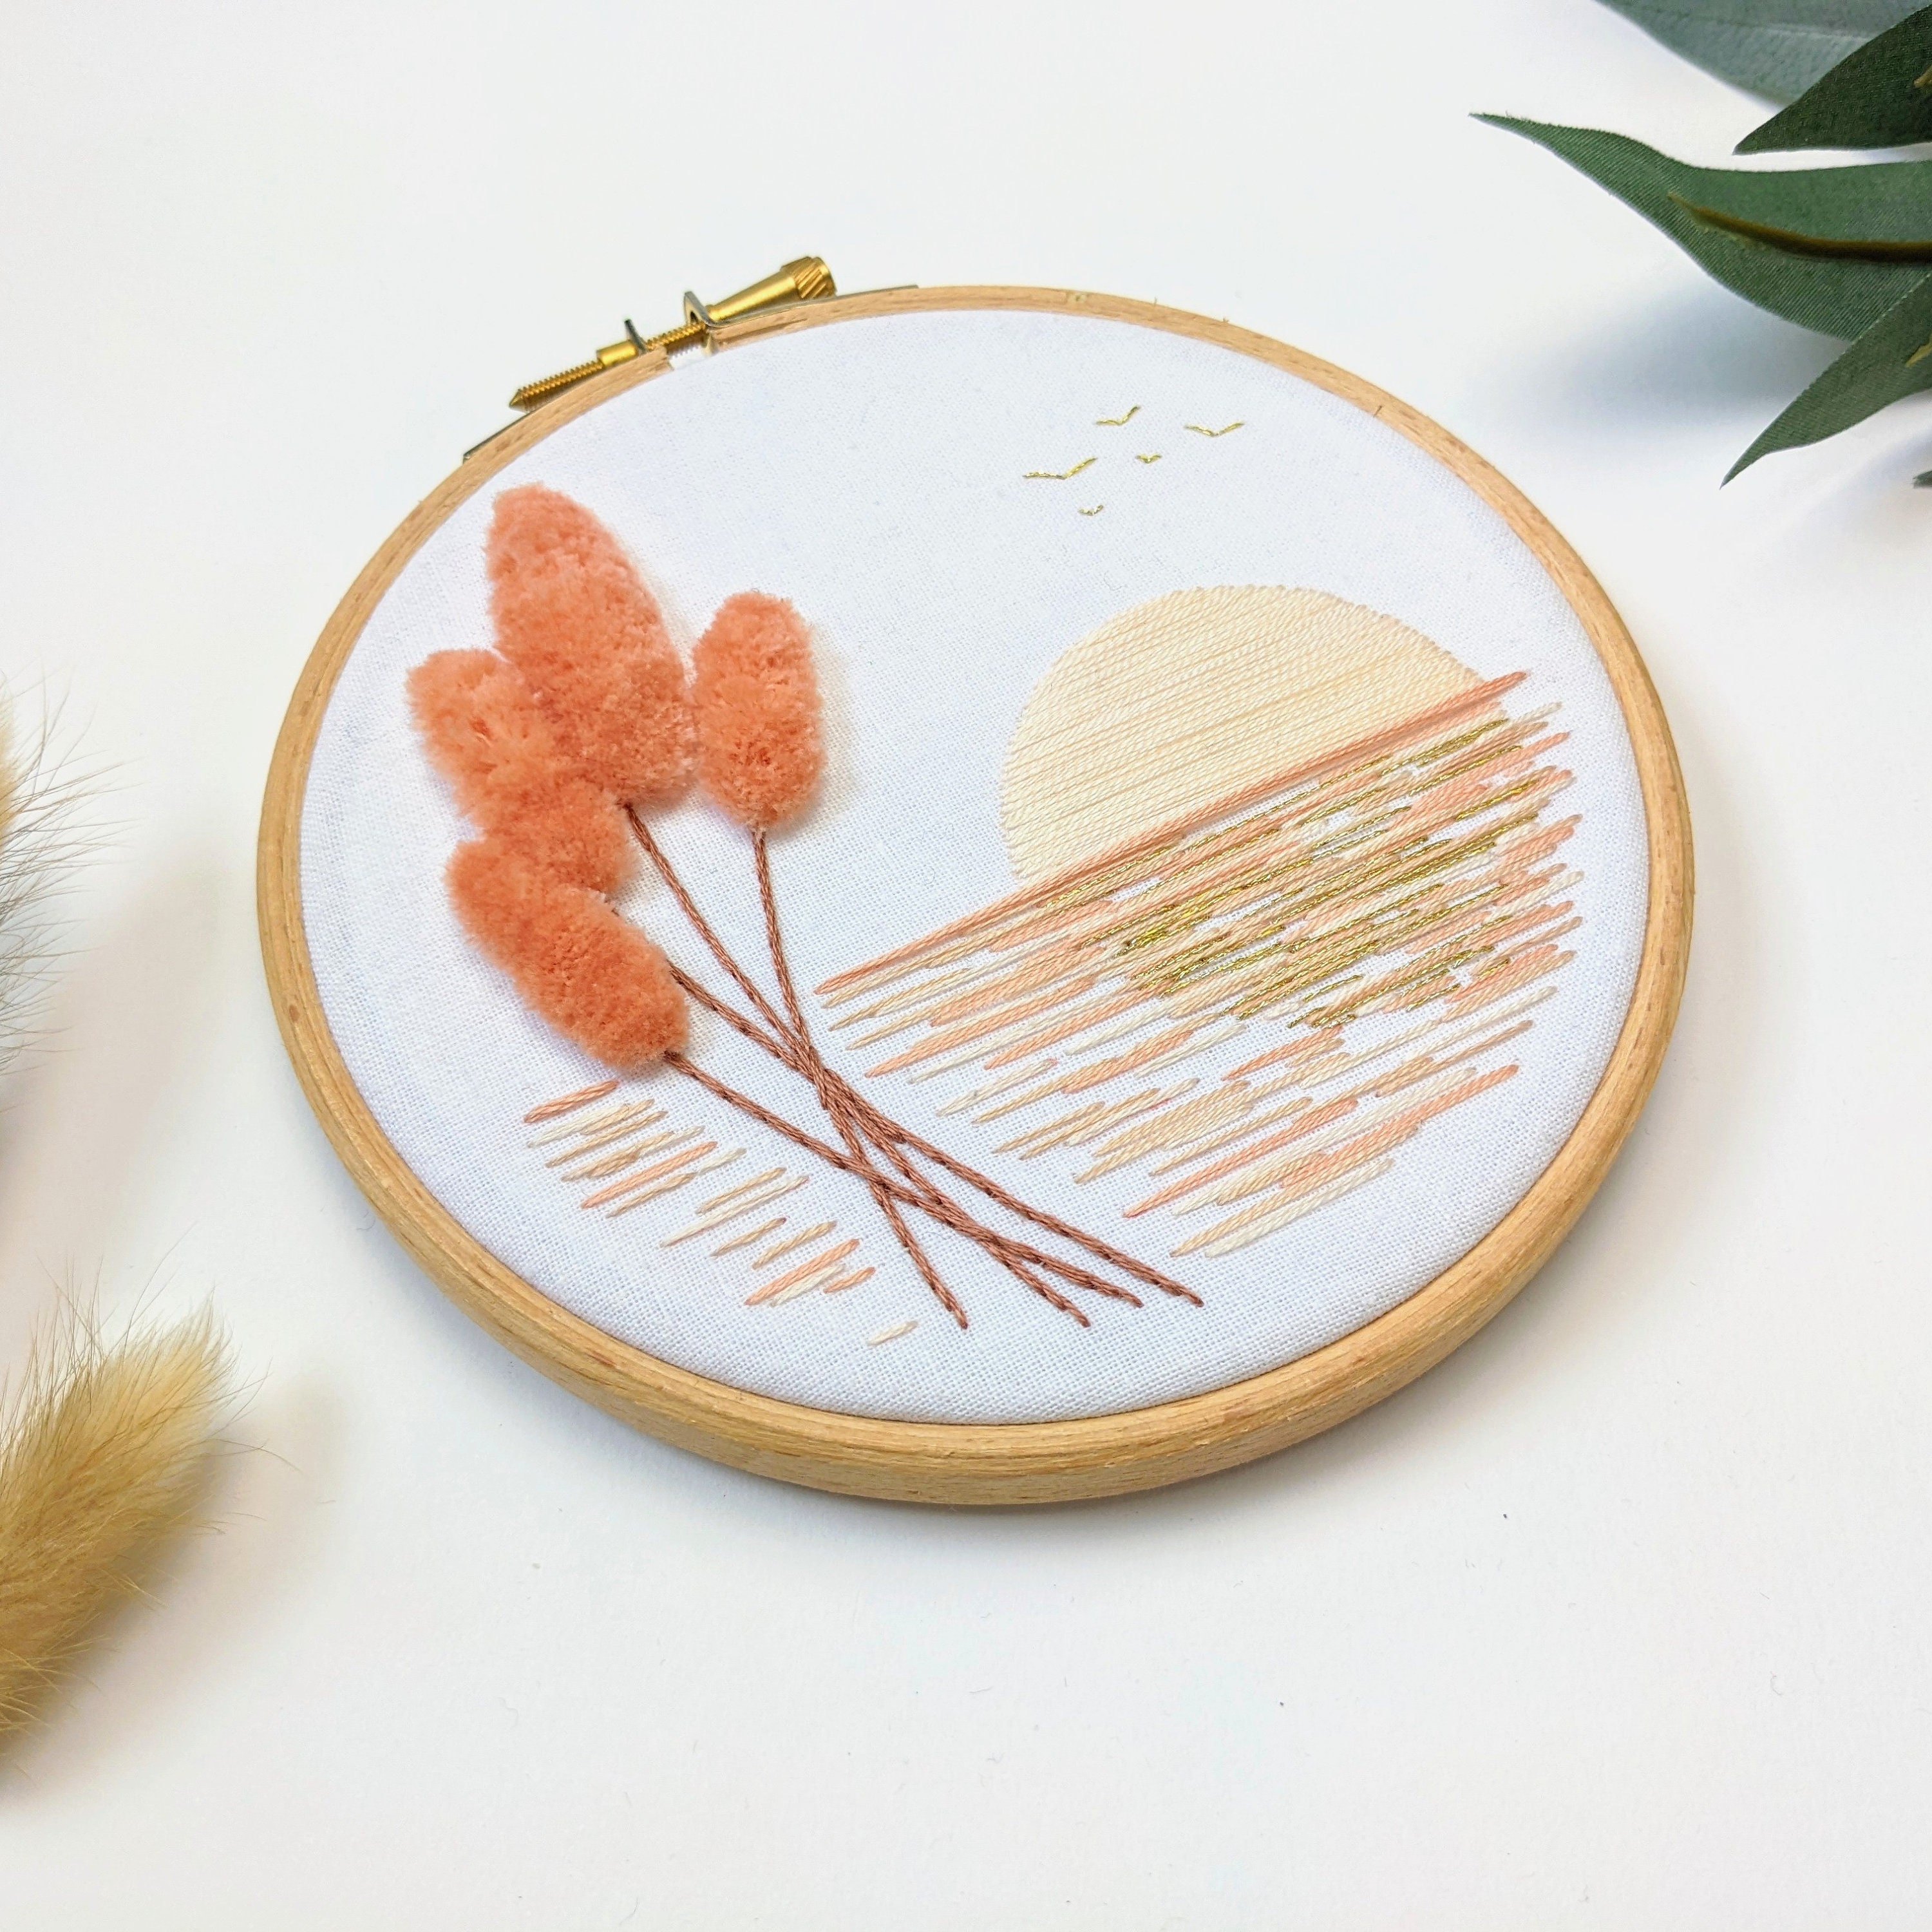 4 reasons why you should consider binding embroidery hoop - Stitch Floral